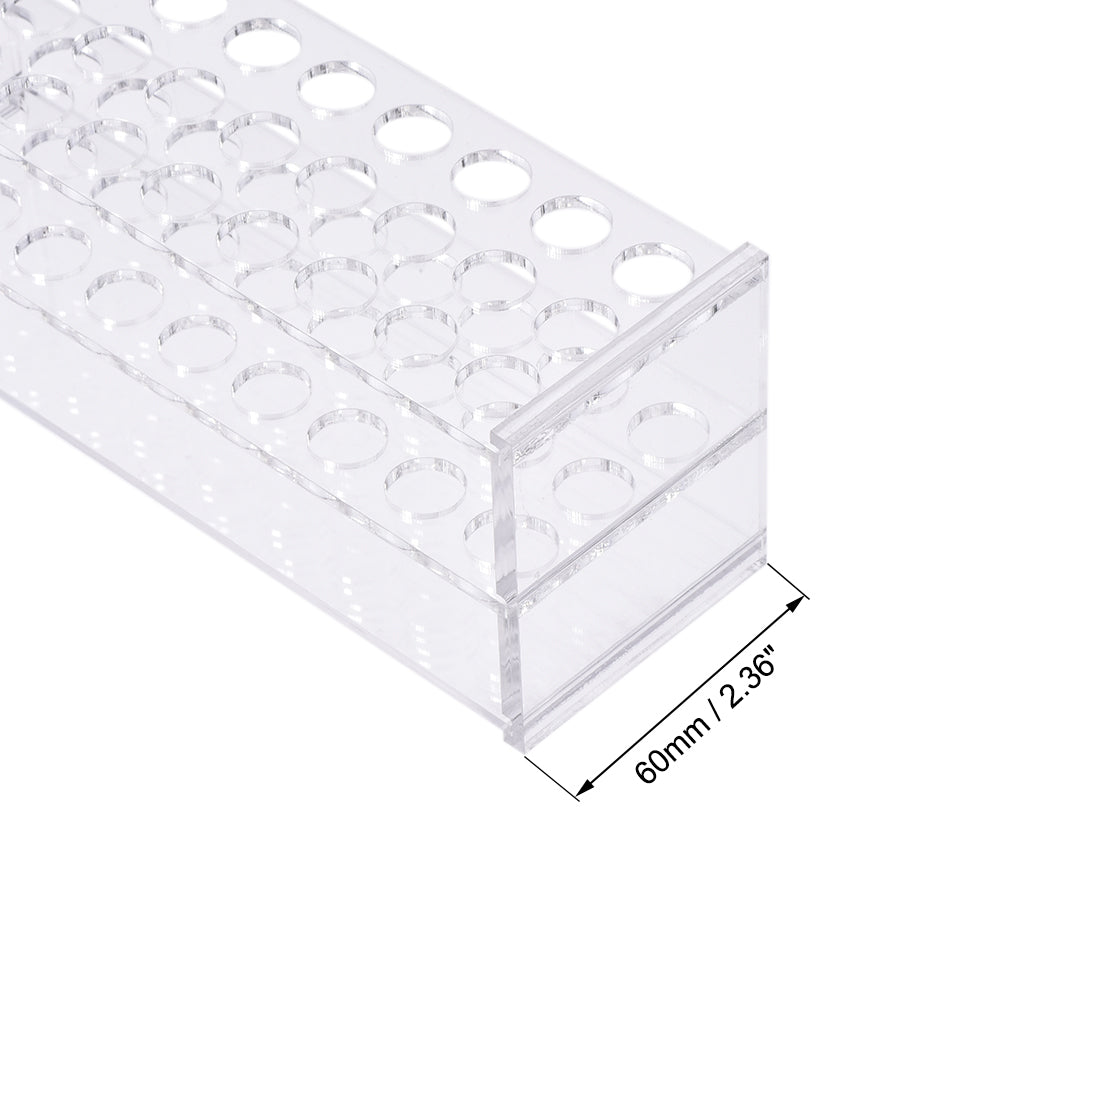 uxcell Uxcell Acrylic Test Tube Holder Rack 3x10 Wells for 11-13mm Centrifuge Tubes Clear